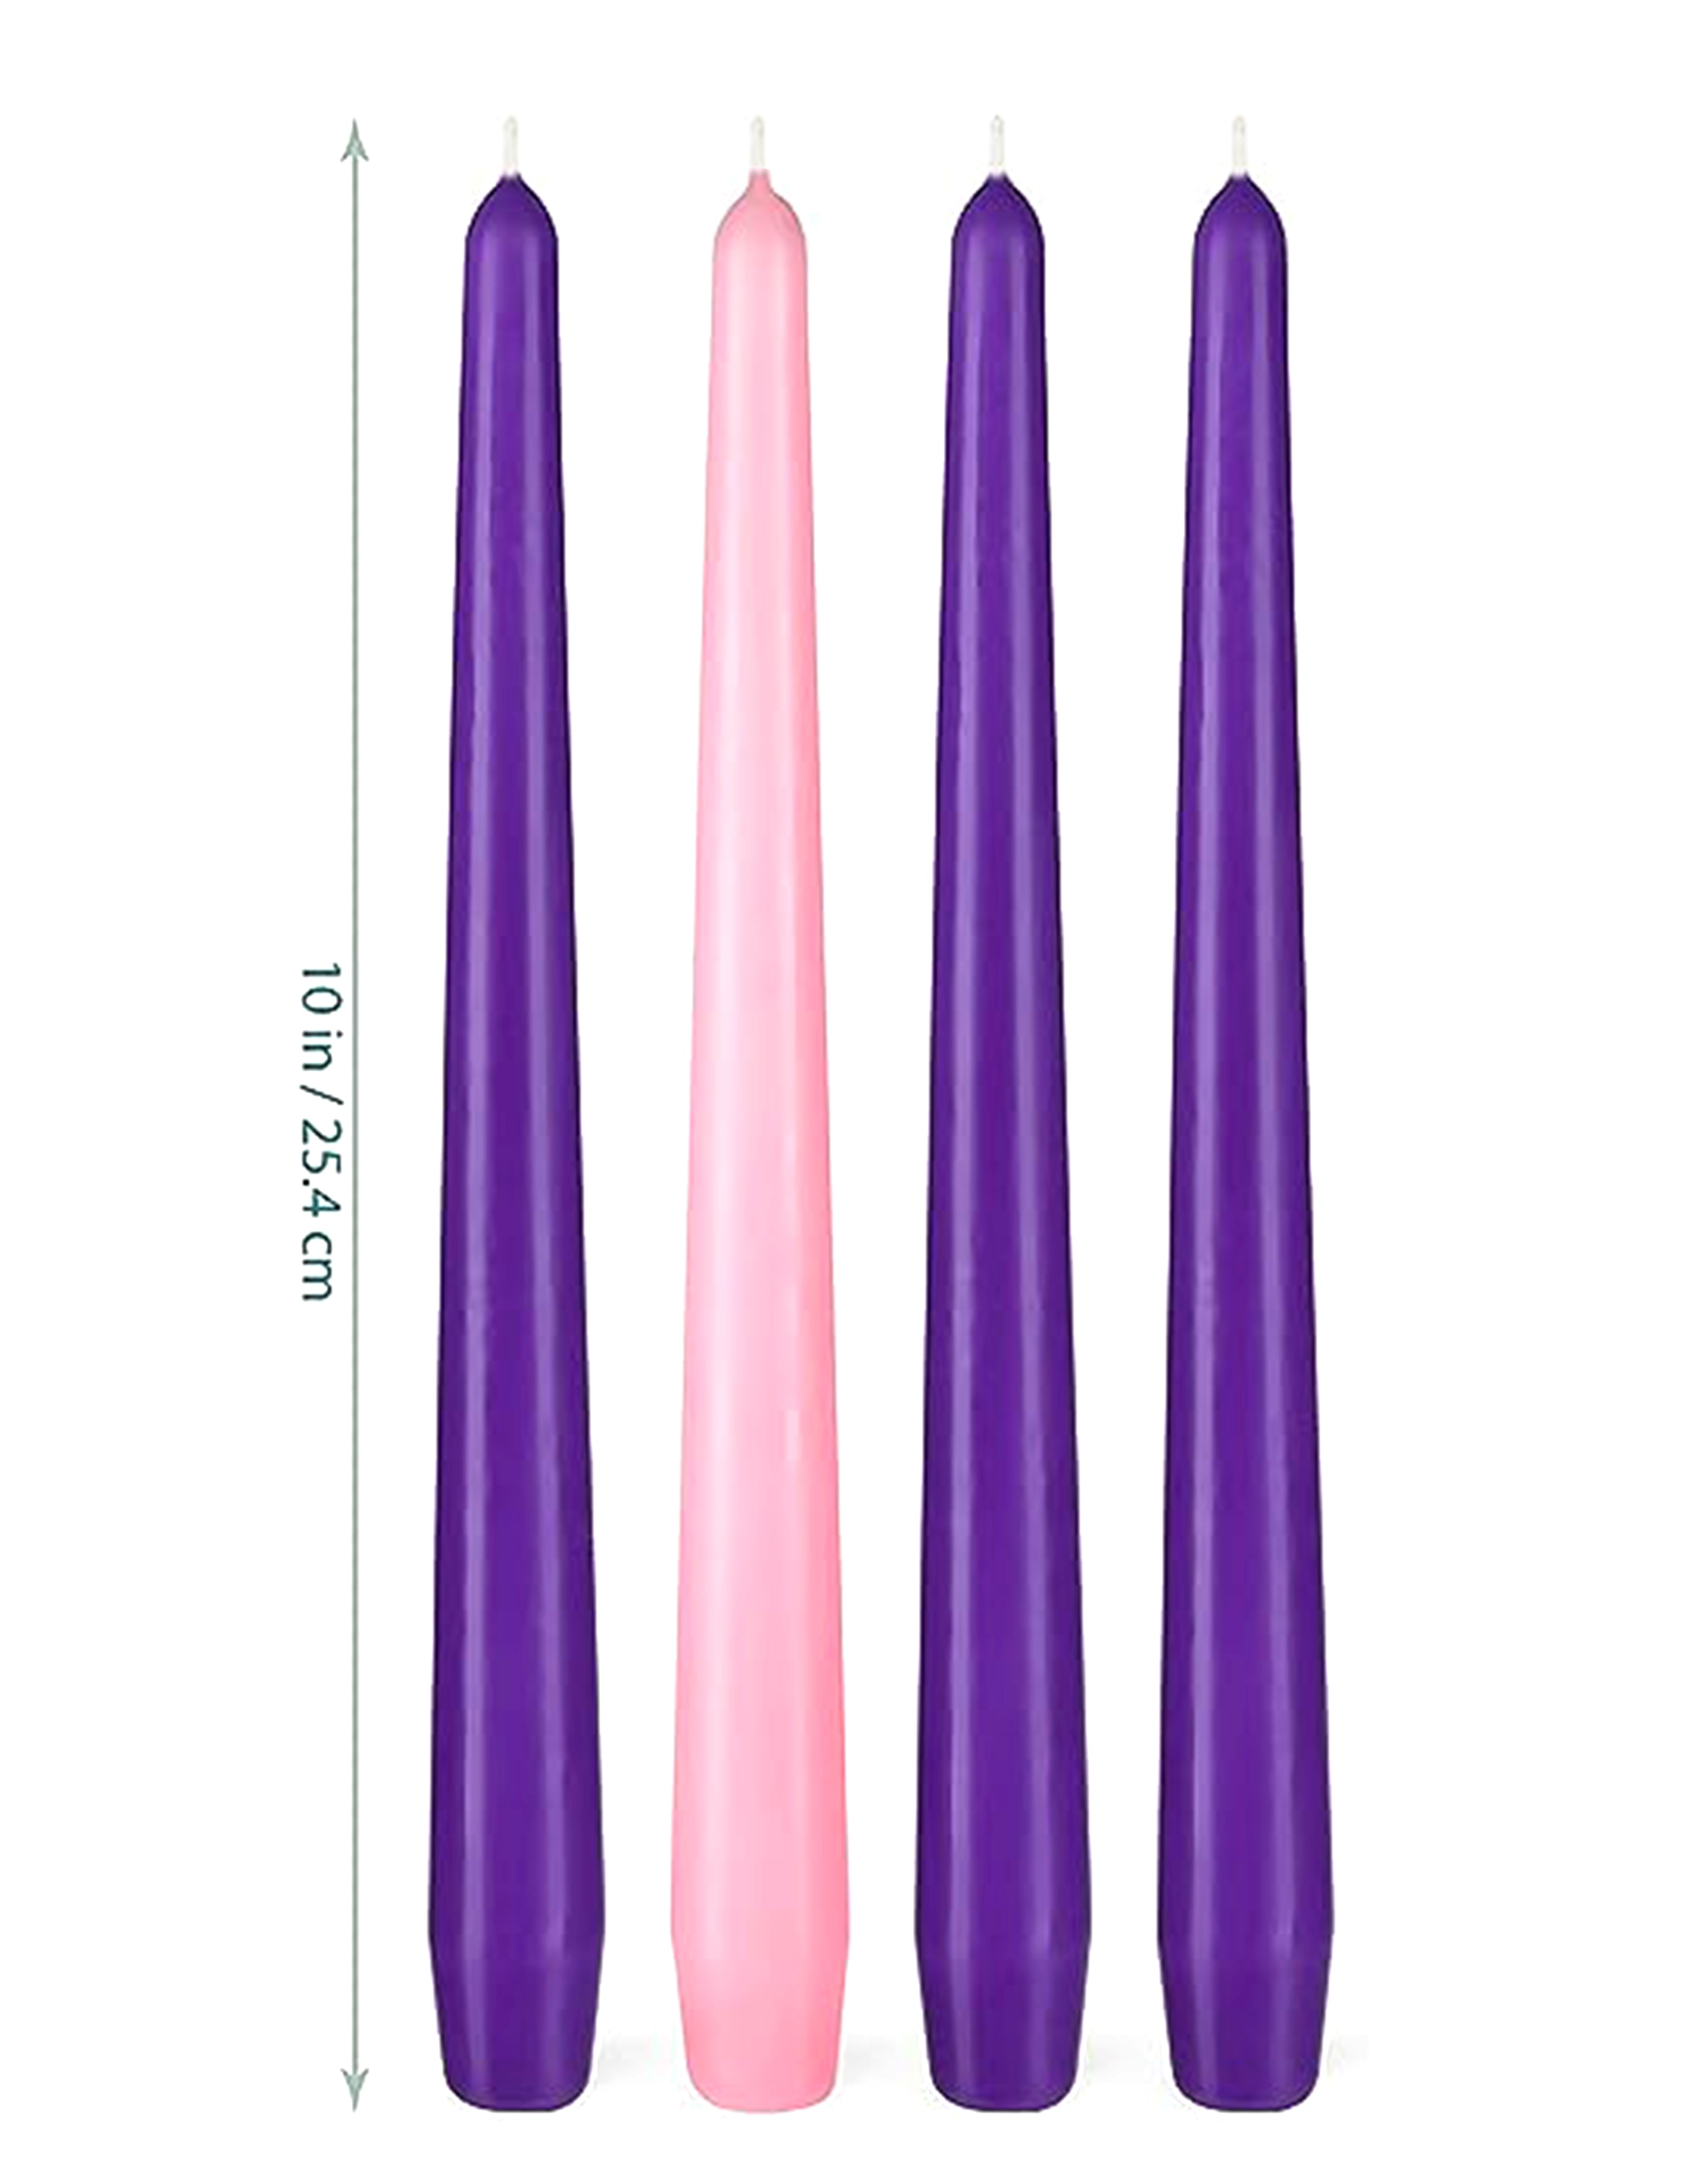 10" Advent Candle Set of 4 candles